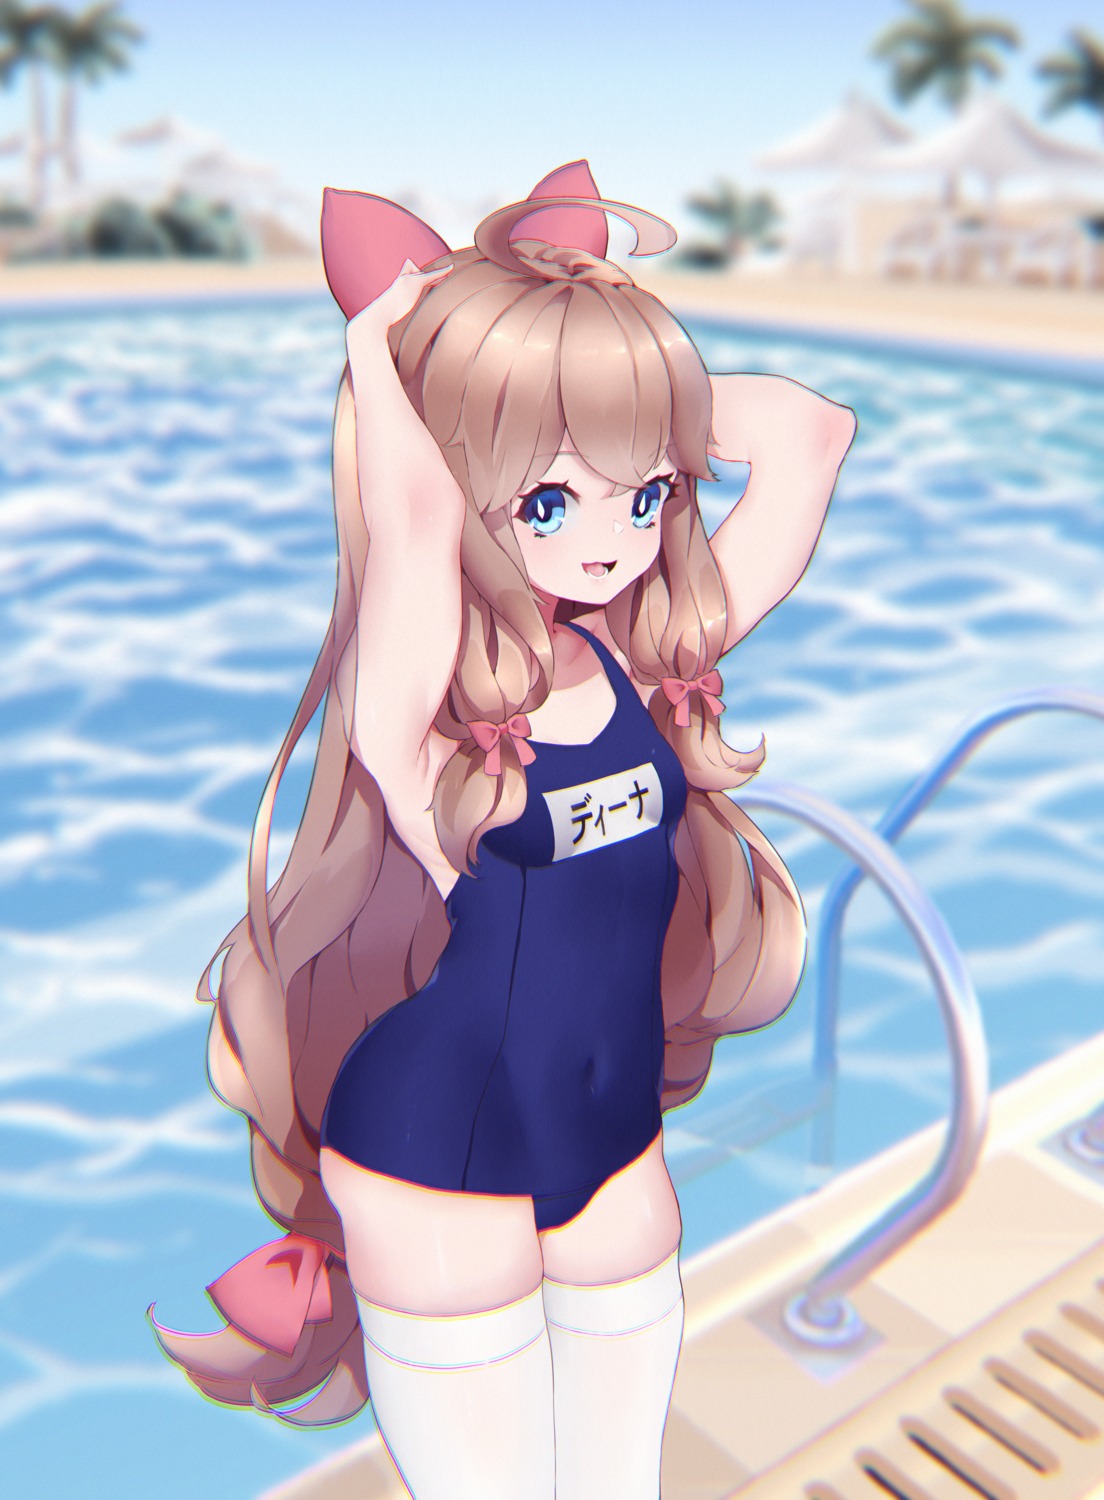 a-soul diana_(a-soul) gioyun_vi loli school_swimsuit swimsuits thighhighs